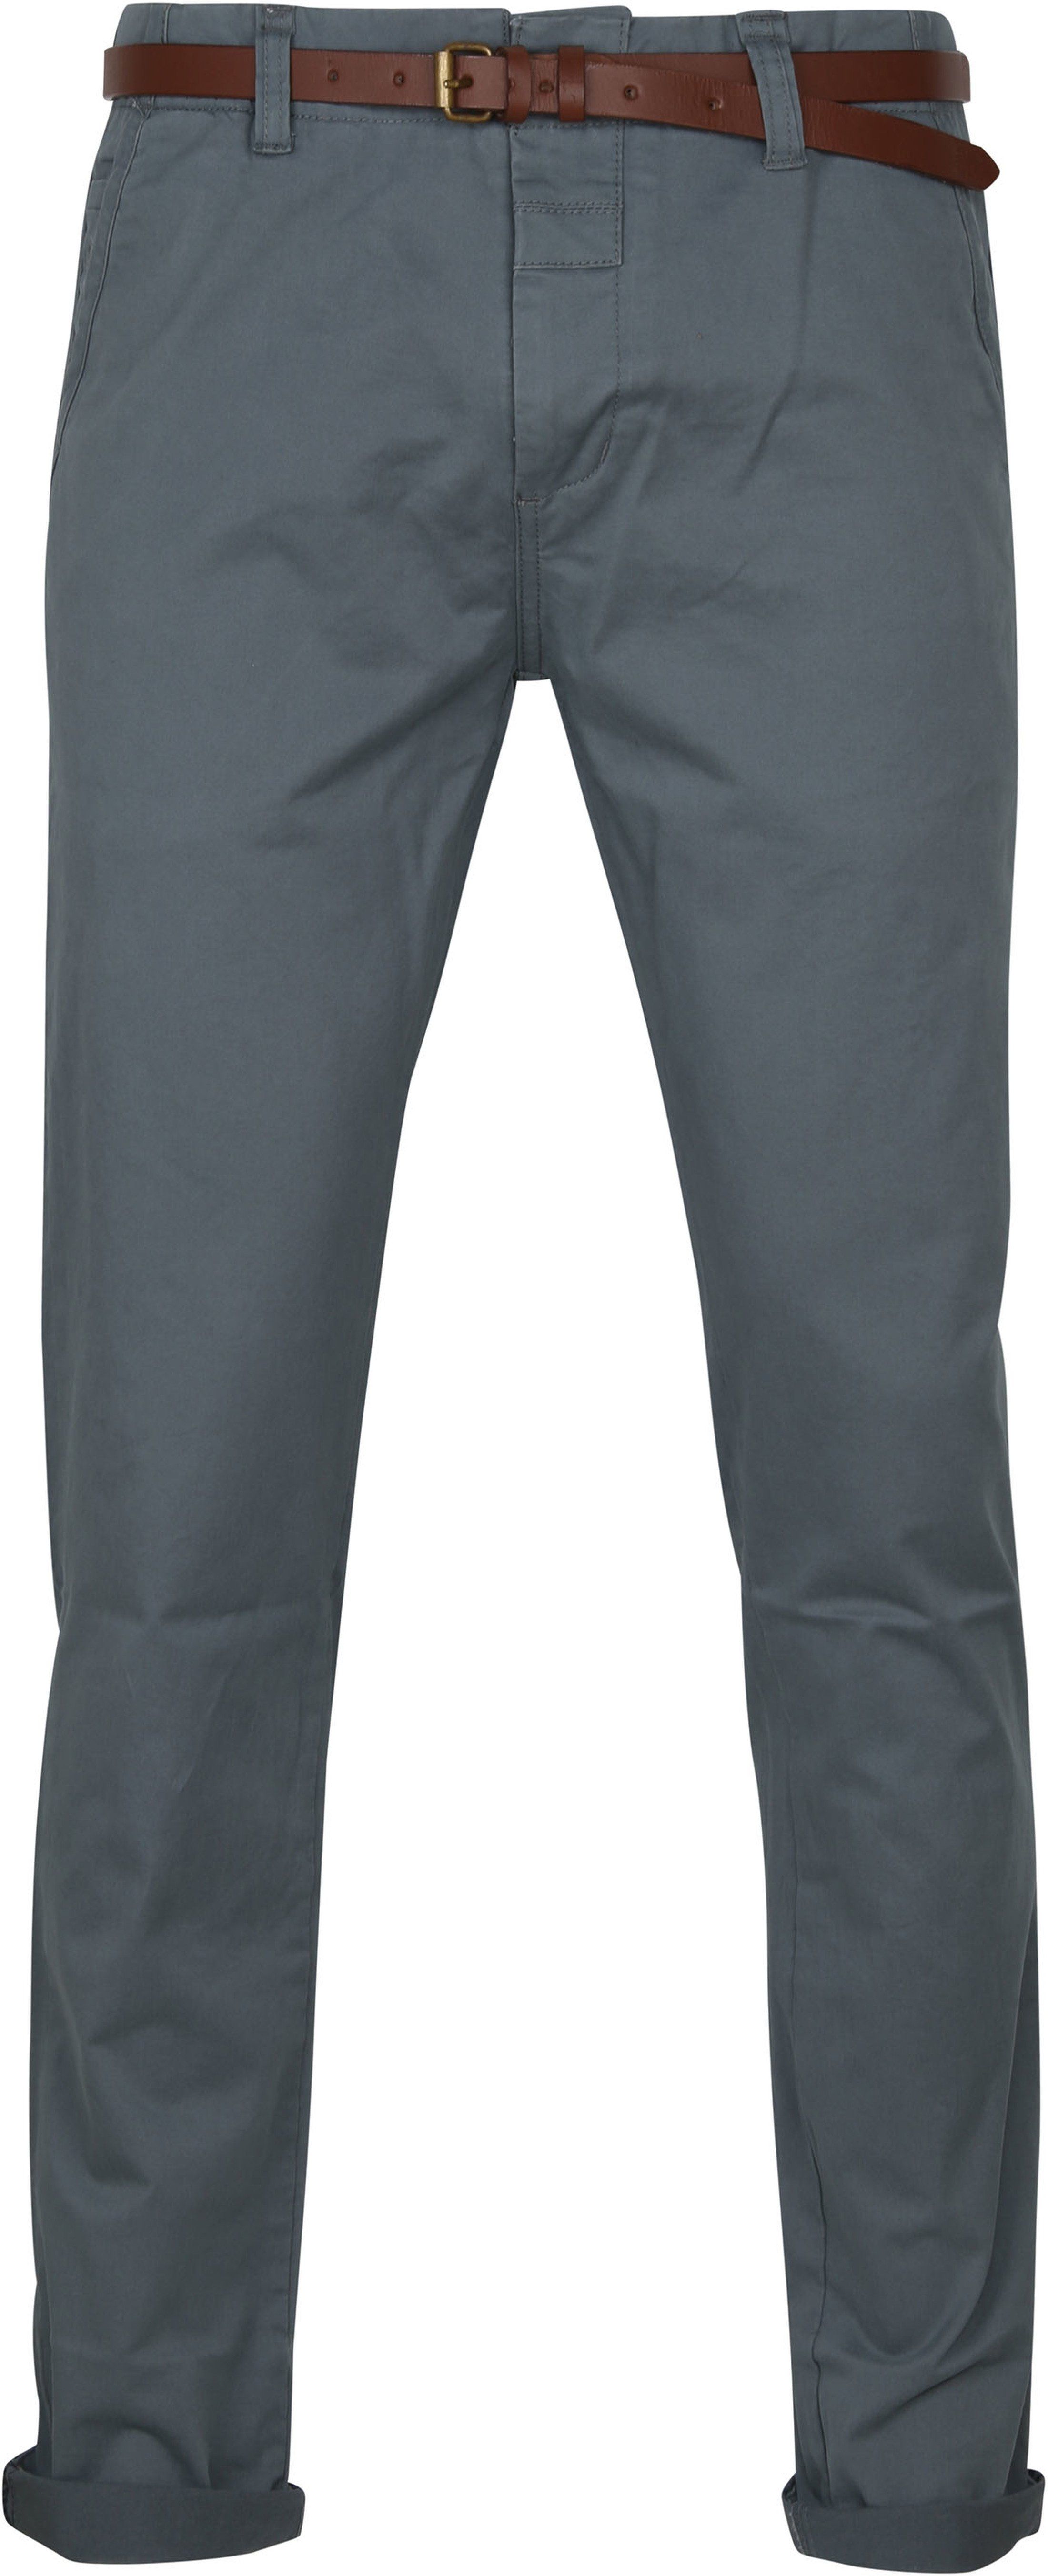 Dstrezzed Chino Presley Gris taille W 28